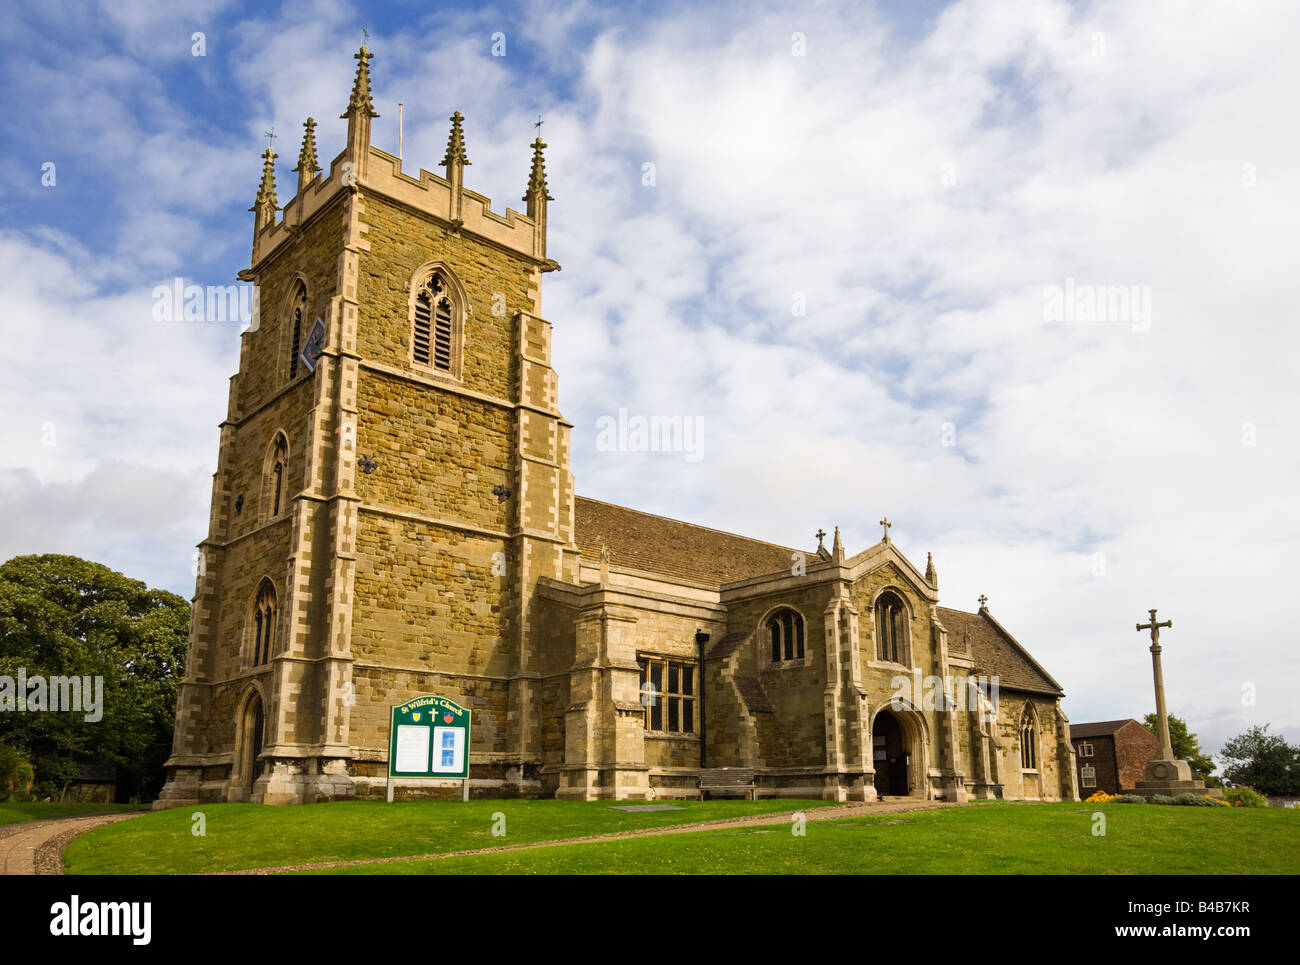 Str. Wilfrids Kirche in Alford Dorf in der Lincolnshire Wolds, England UK Stockfoto